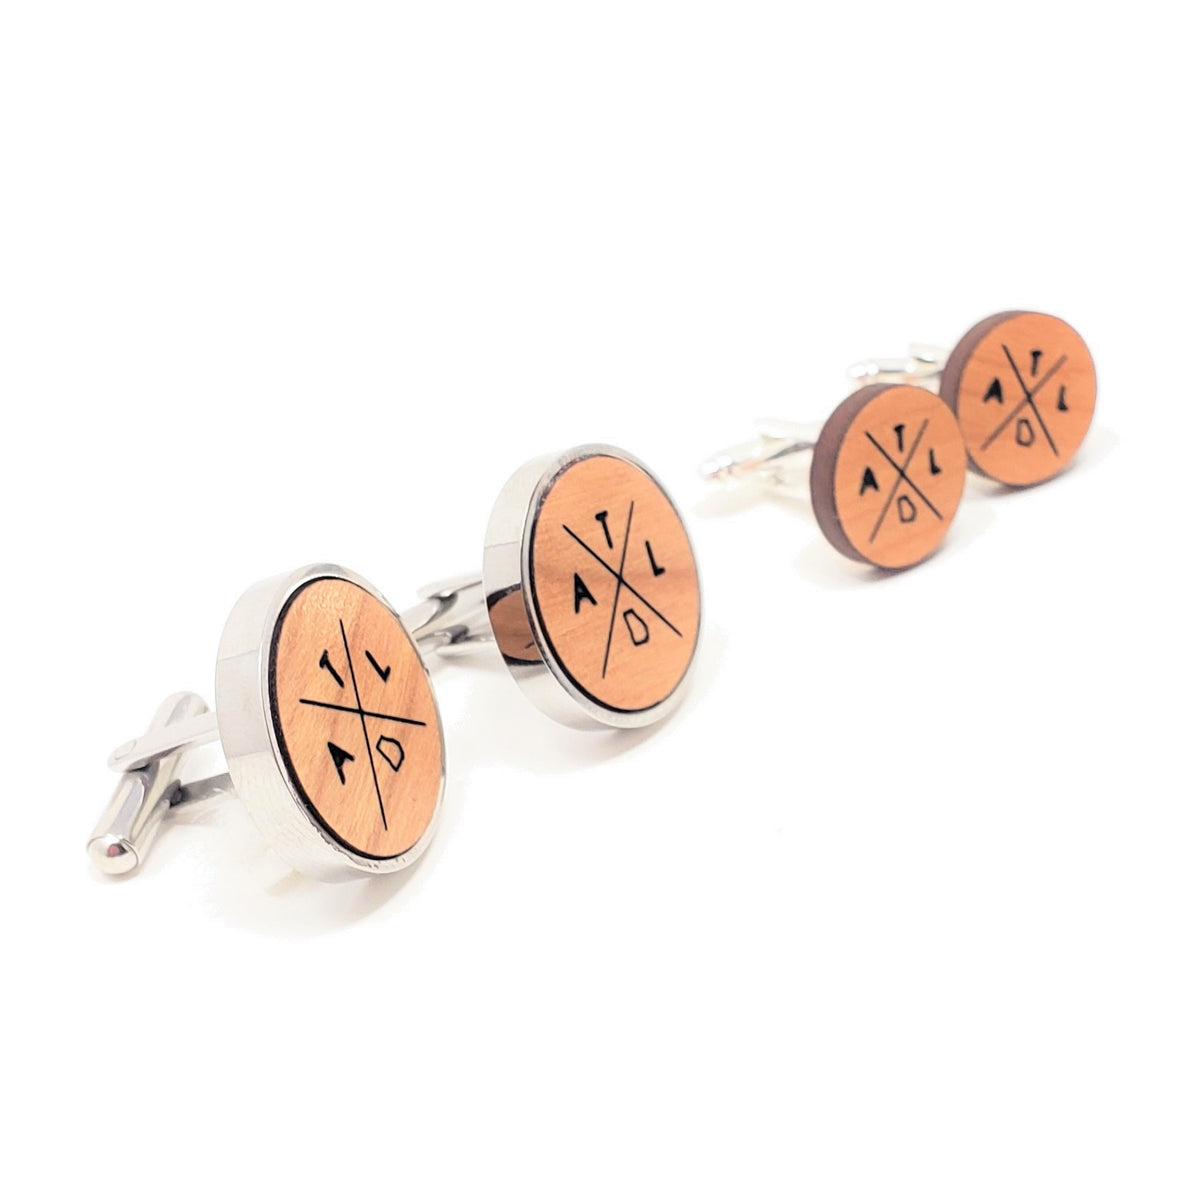 ATL Cross Stainless and Wood Cufflinks